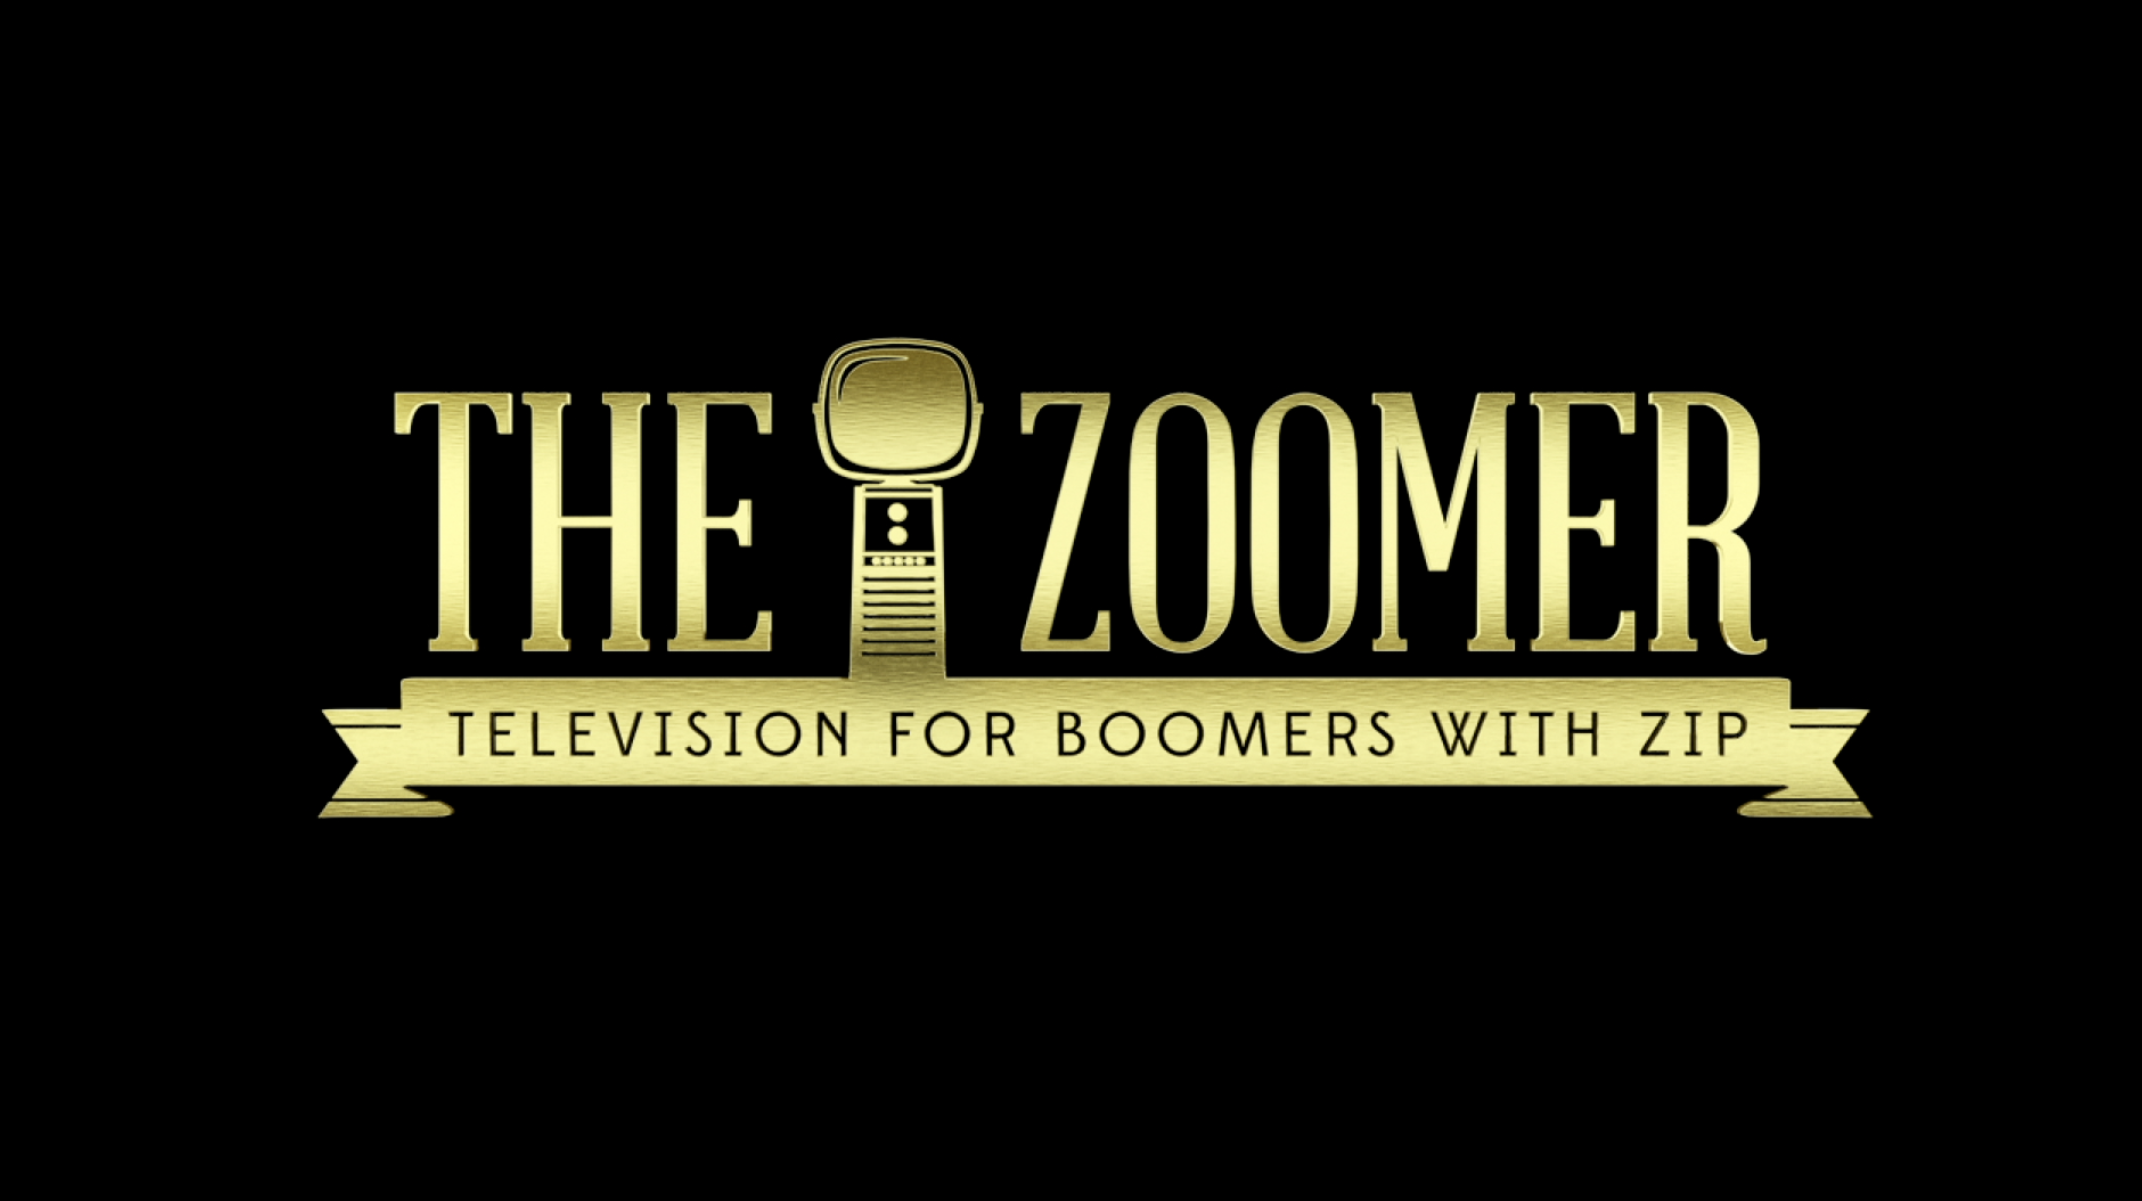 TheZoomer logo in gold text on a black background